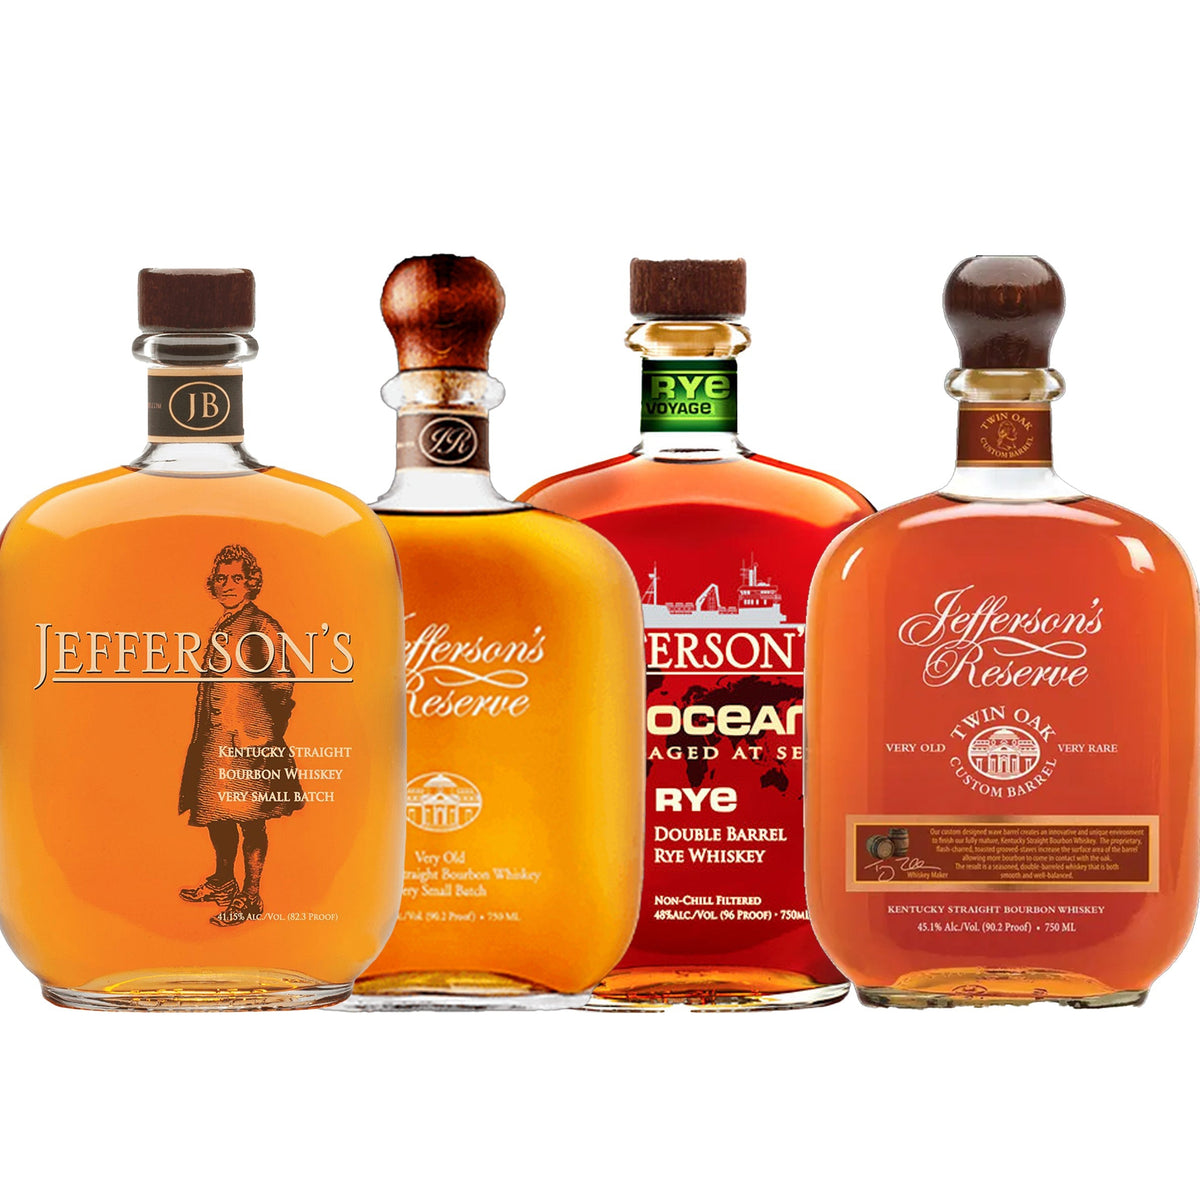 Jefferson's Reserve Bundle, Ocean Aged at Sea Rye Voyage & Very Small Batch